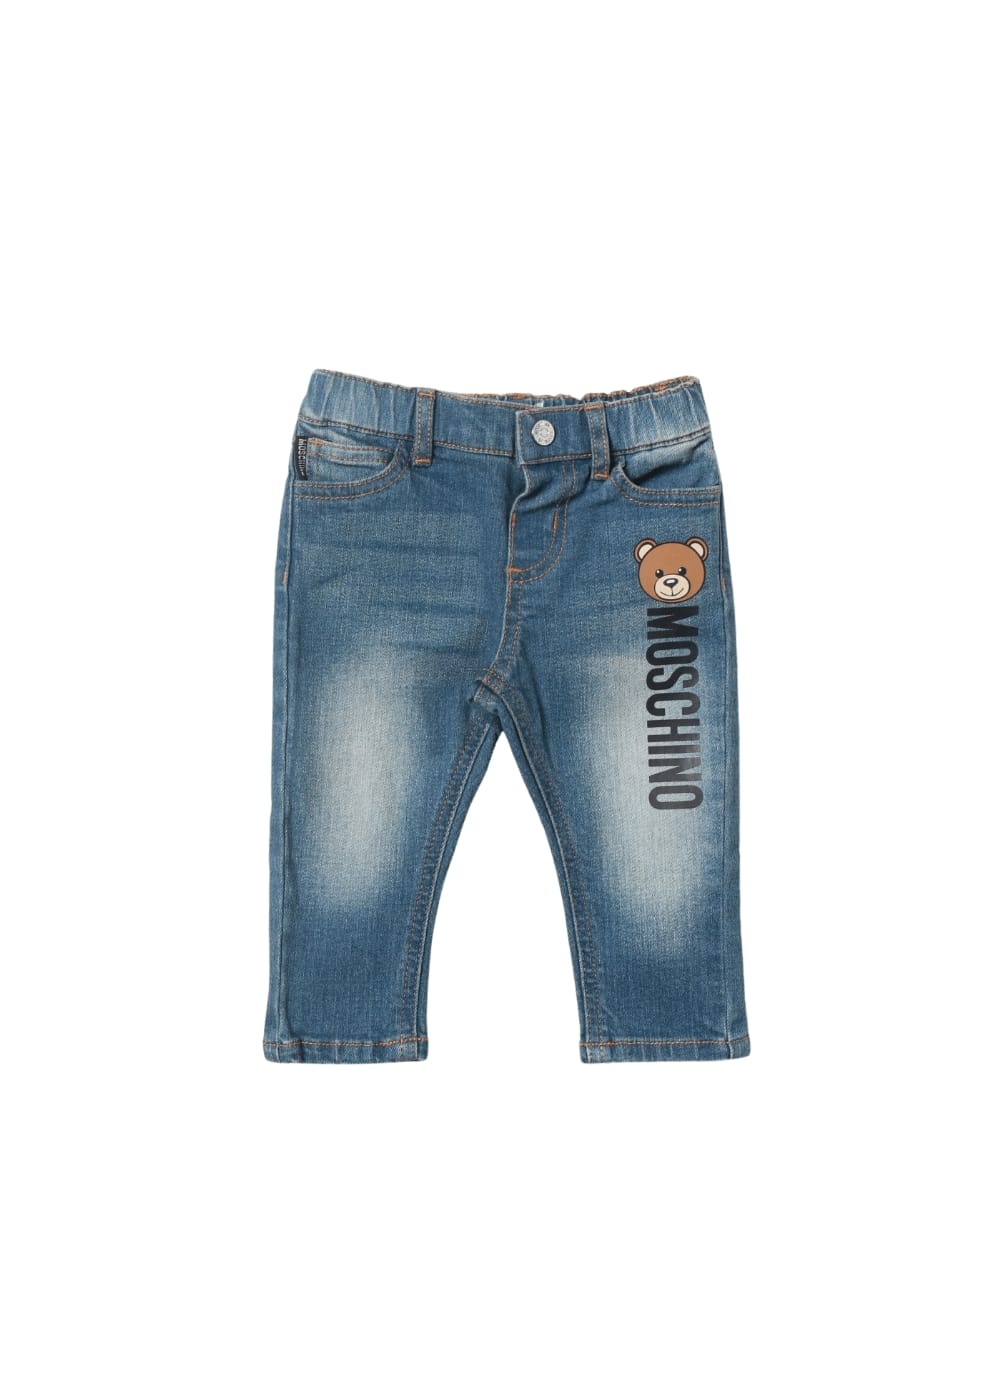 Featured image for “Moschino Jeans Bambino”